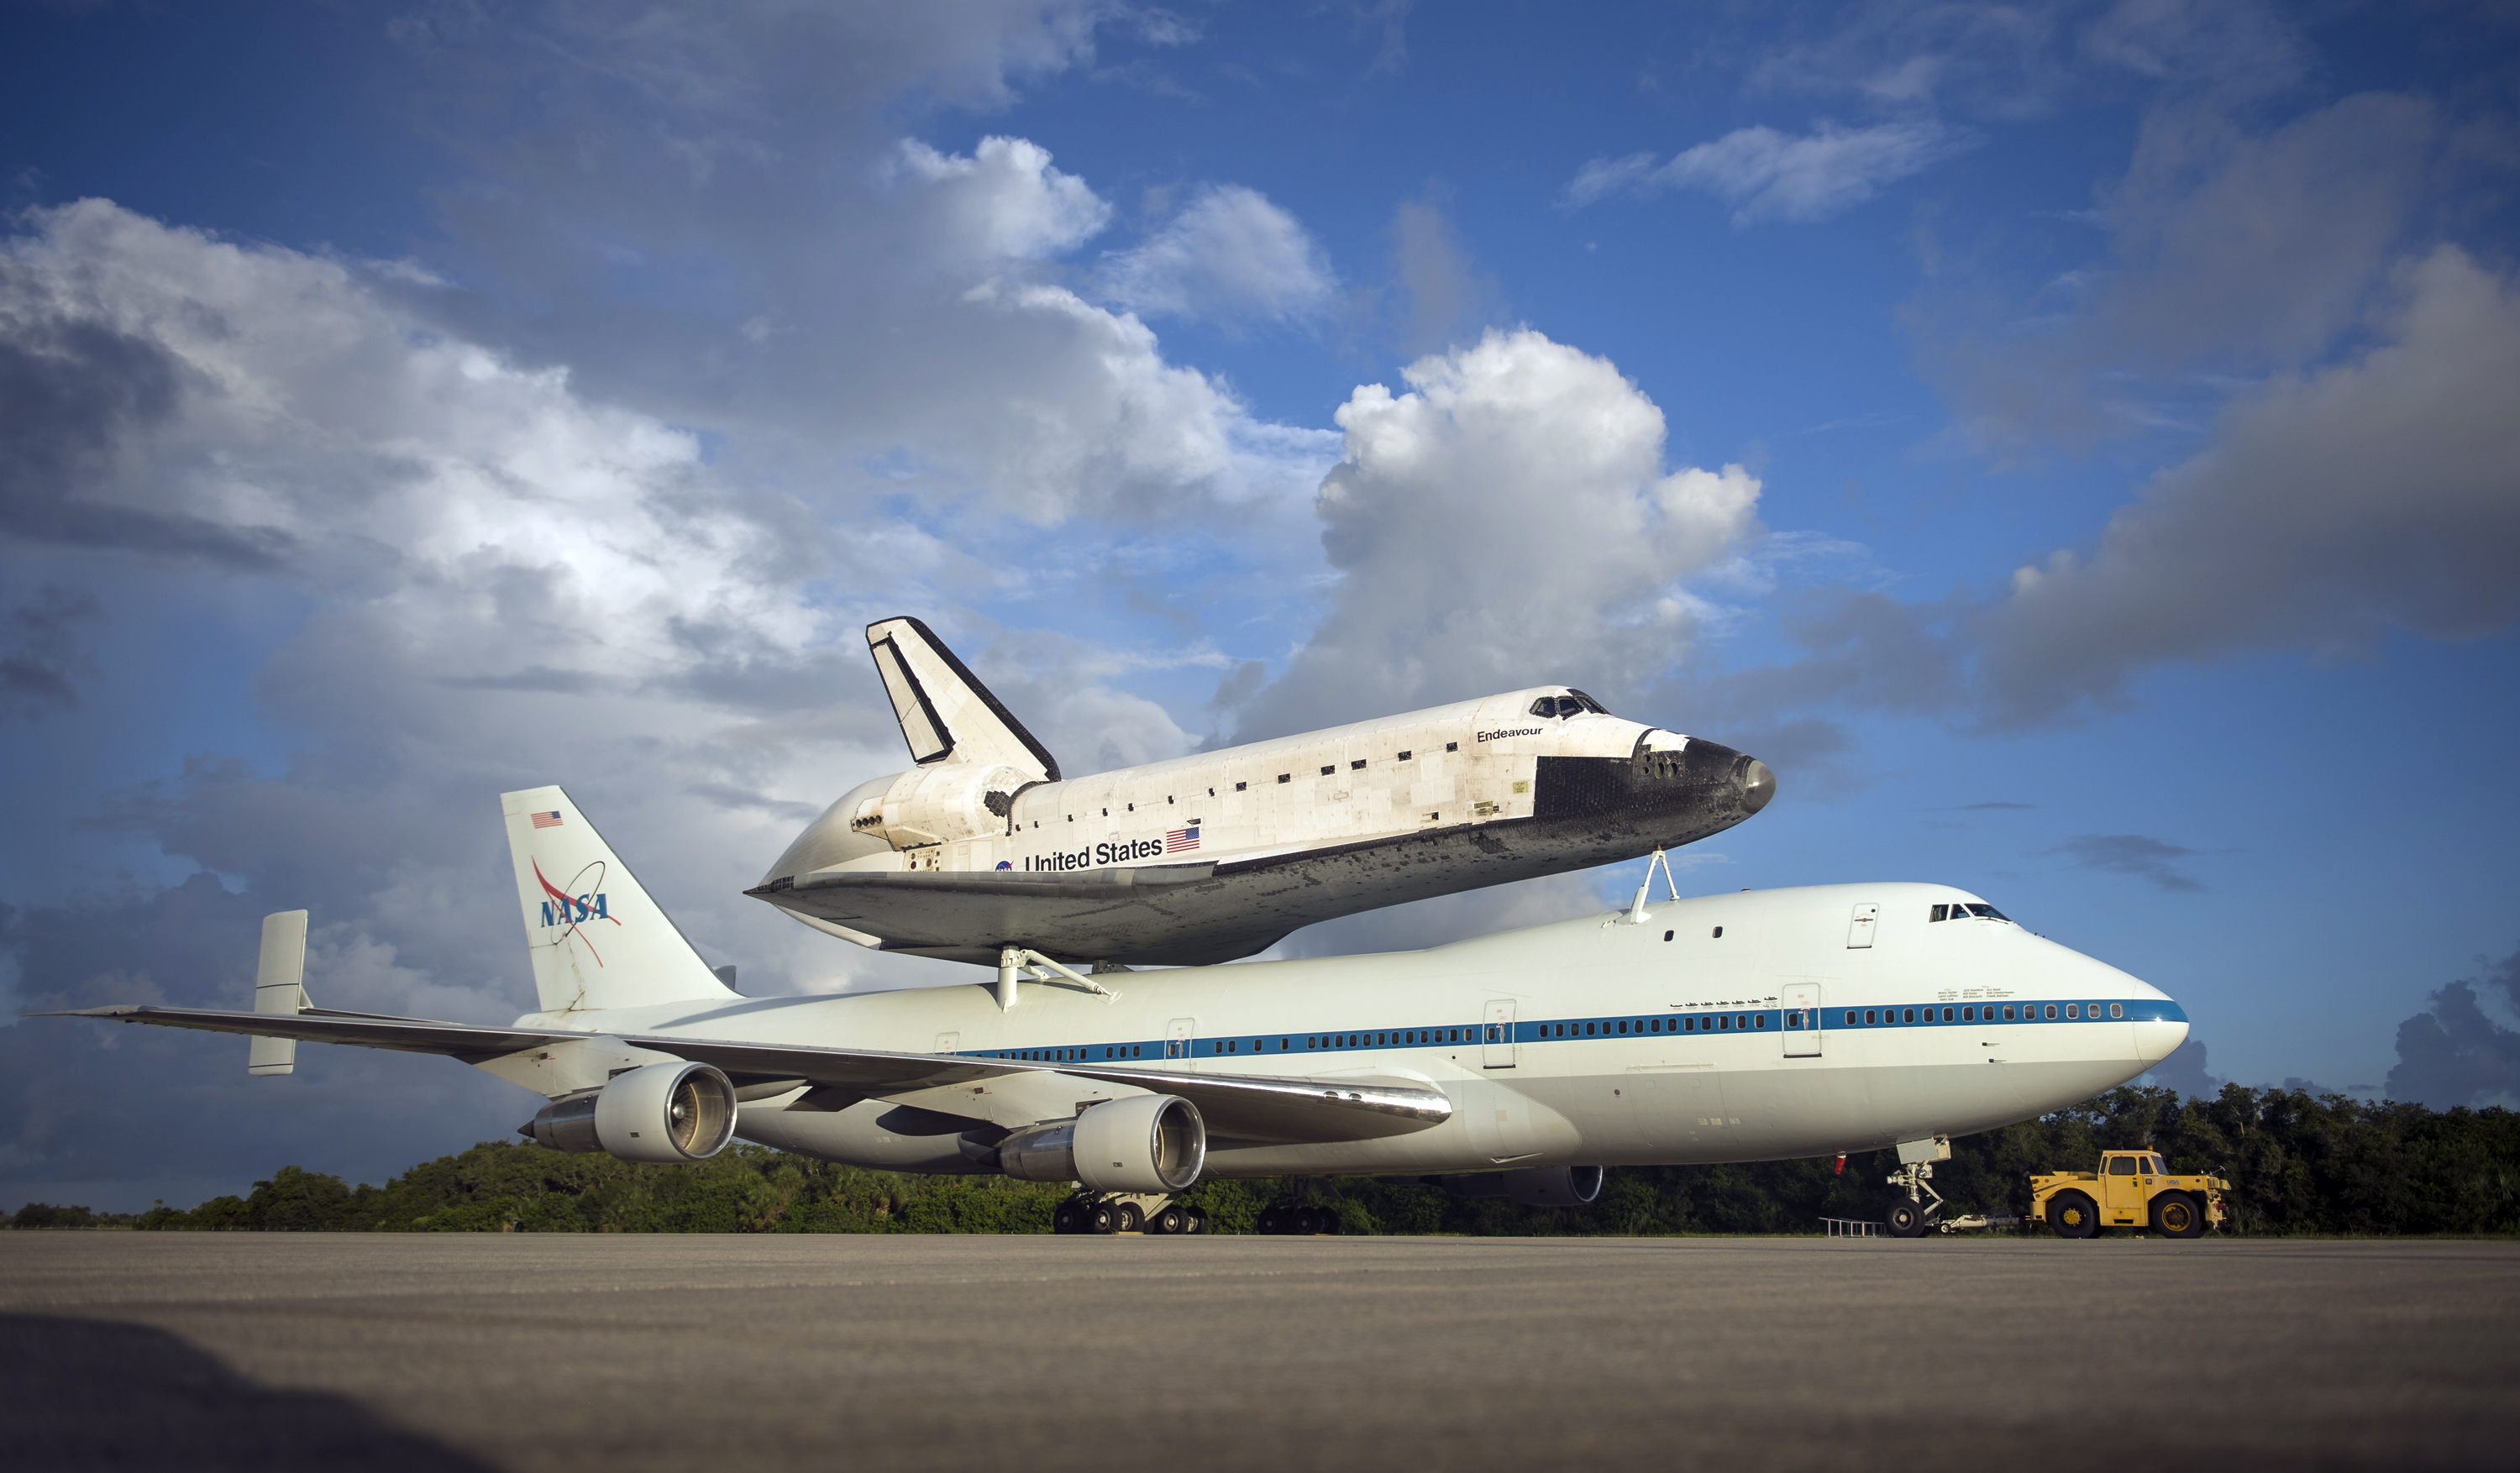 See the space shuttle on its last flight Friday